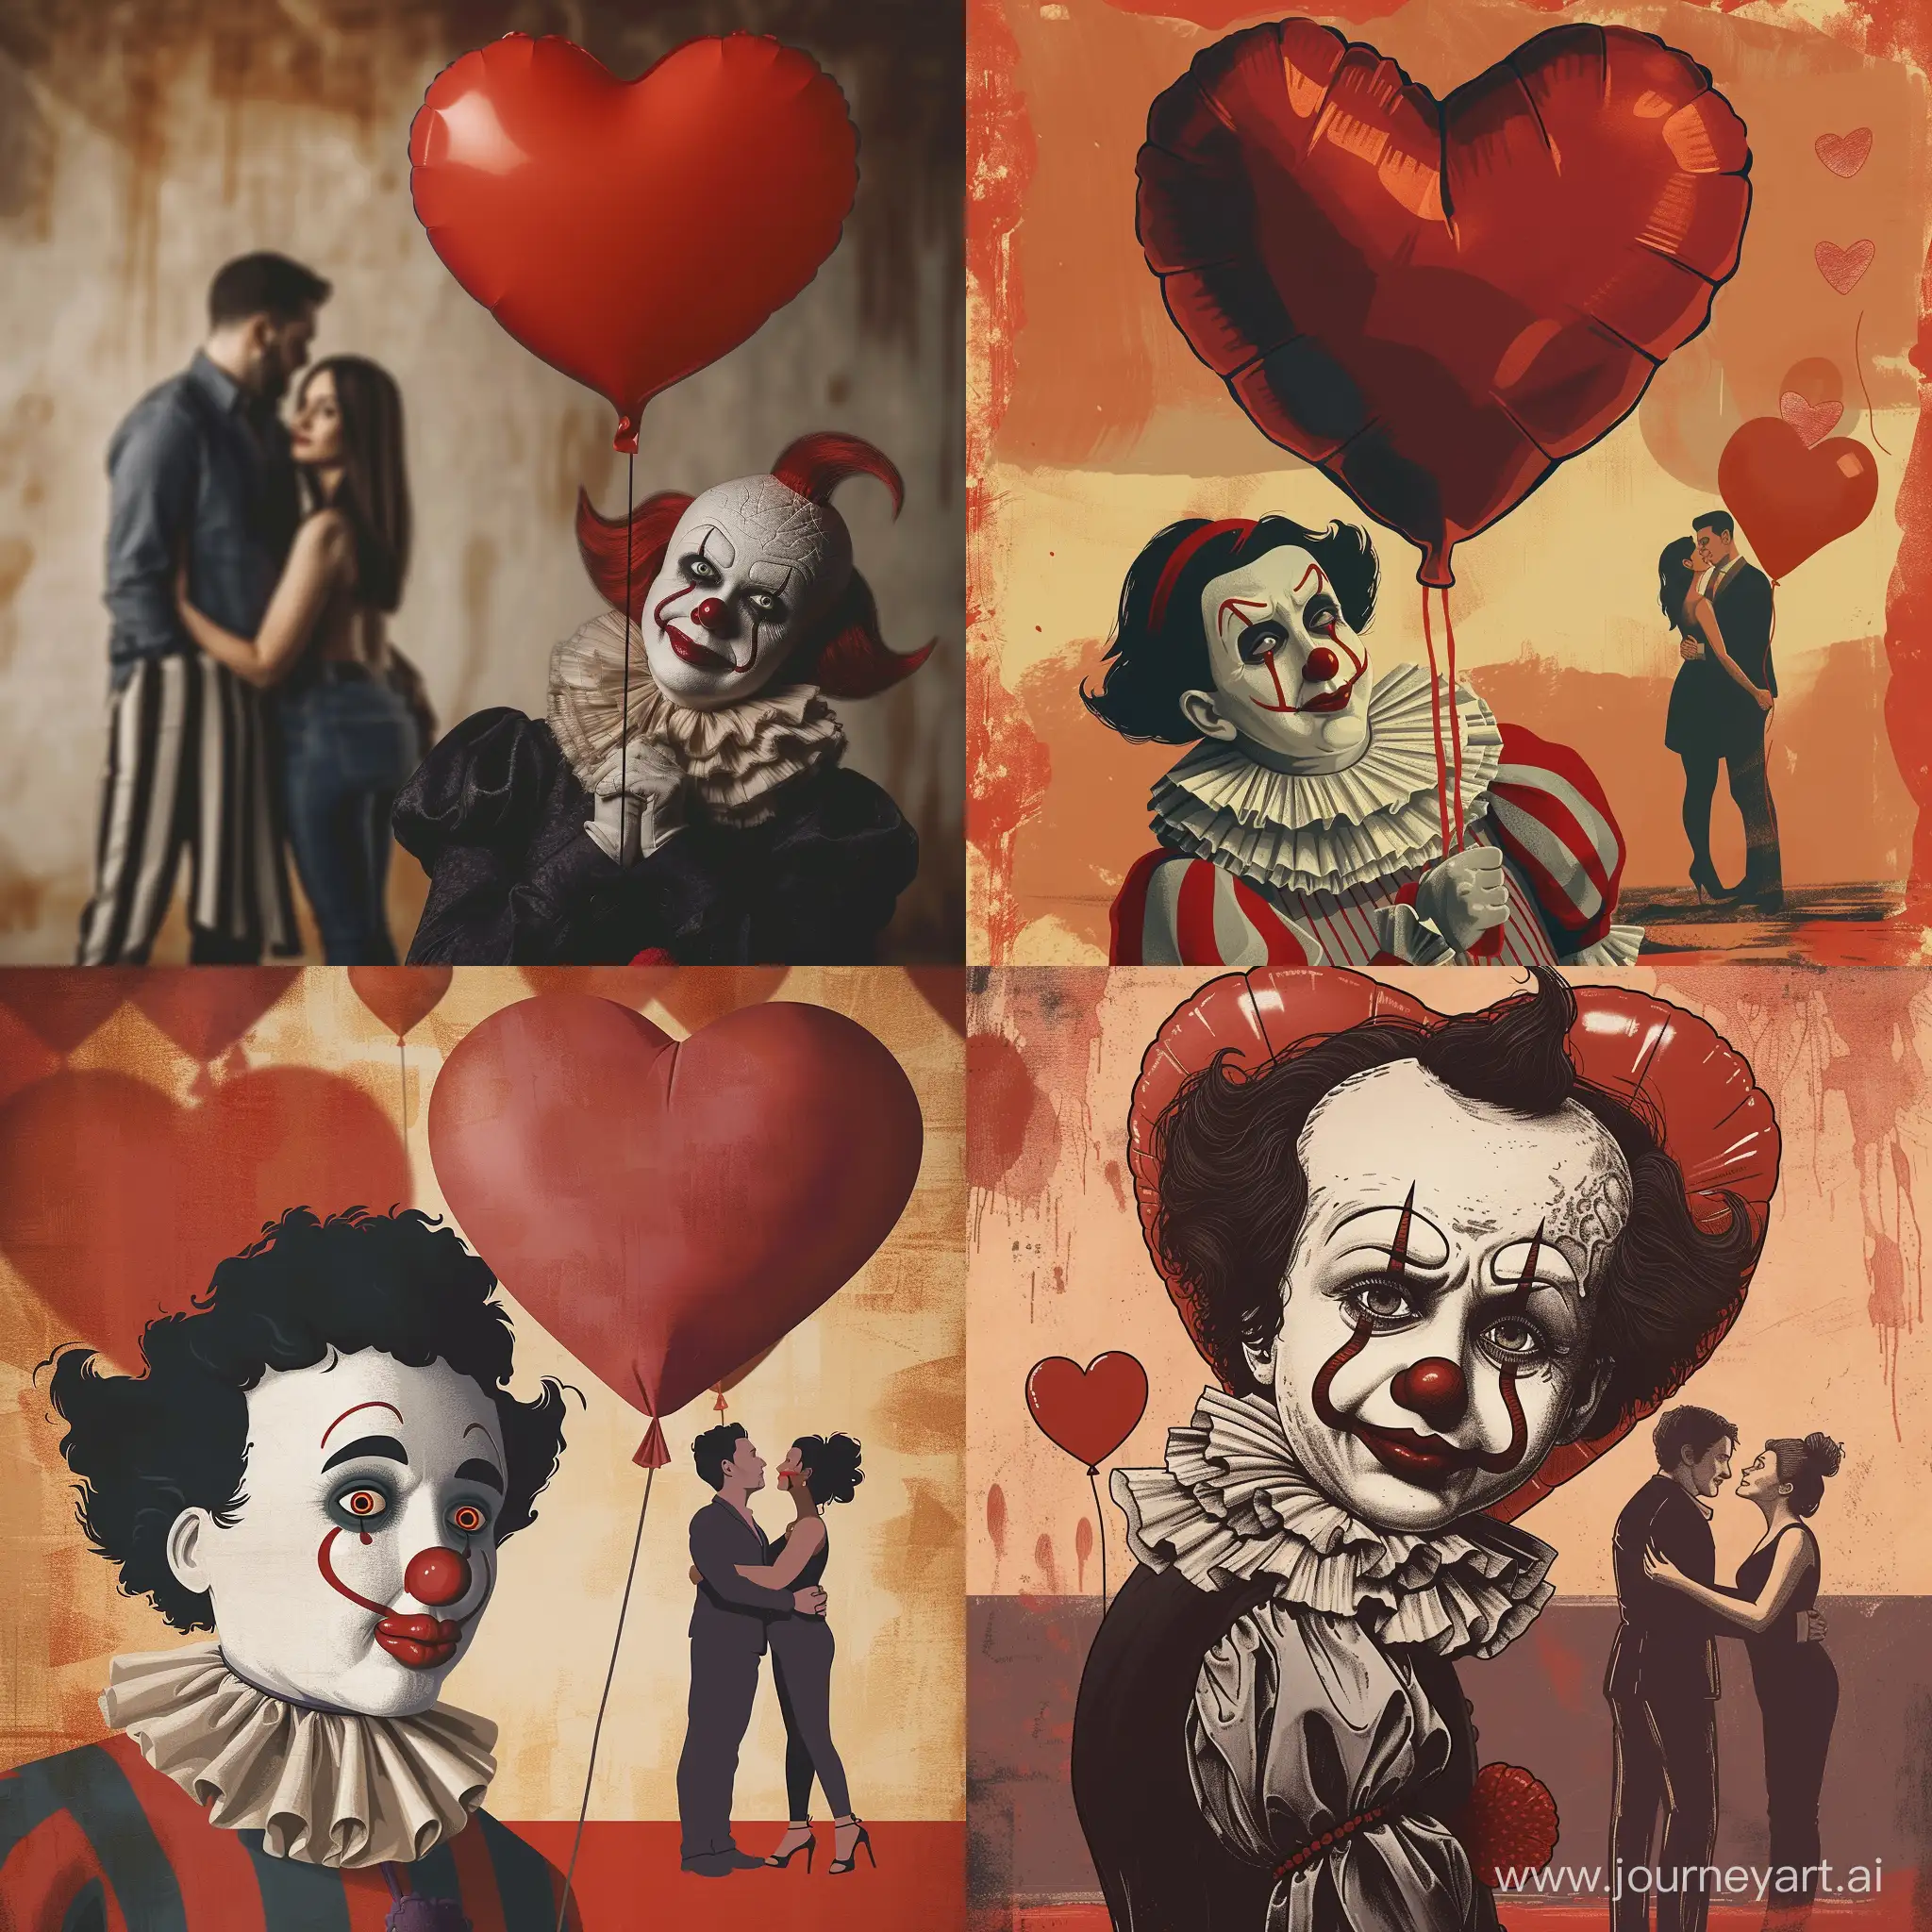 Sad-Clown-Holding-Heart-Balloon-with-Loving-Couple-in-Background